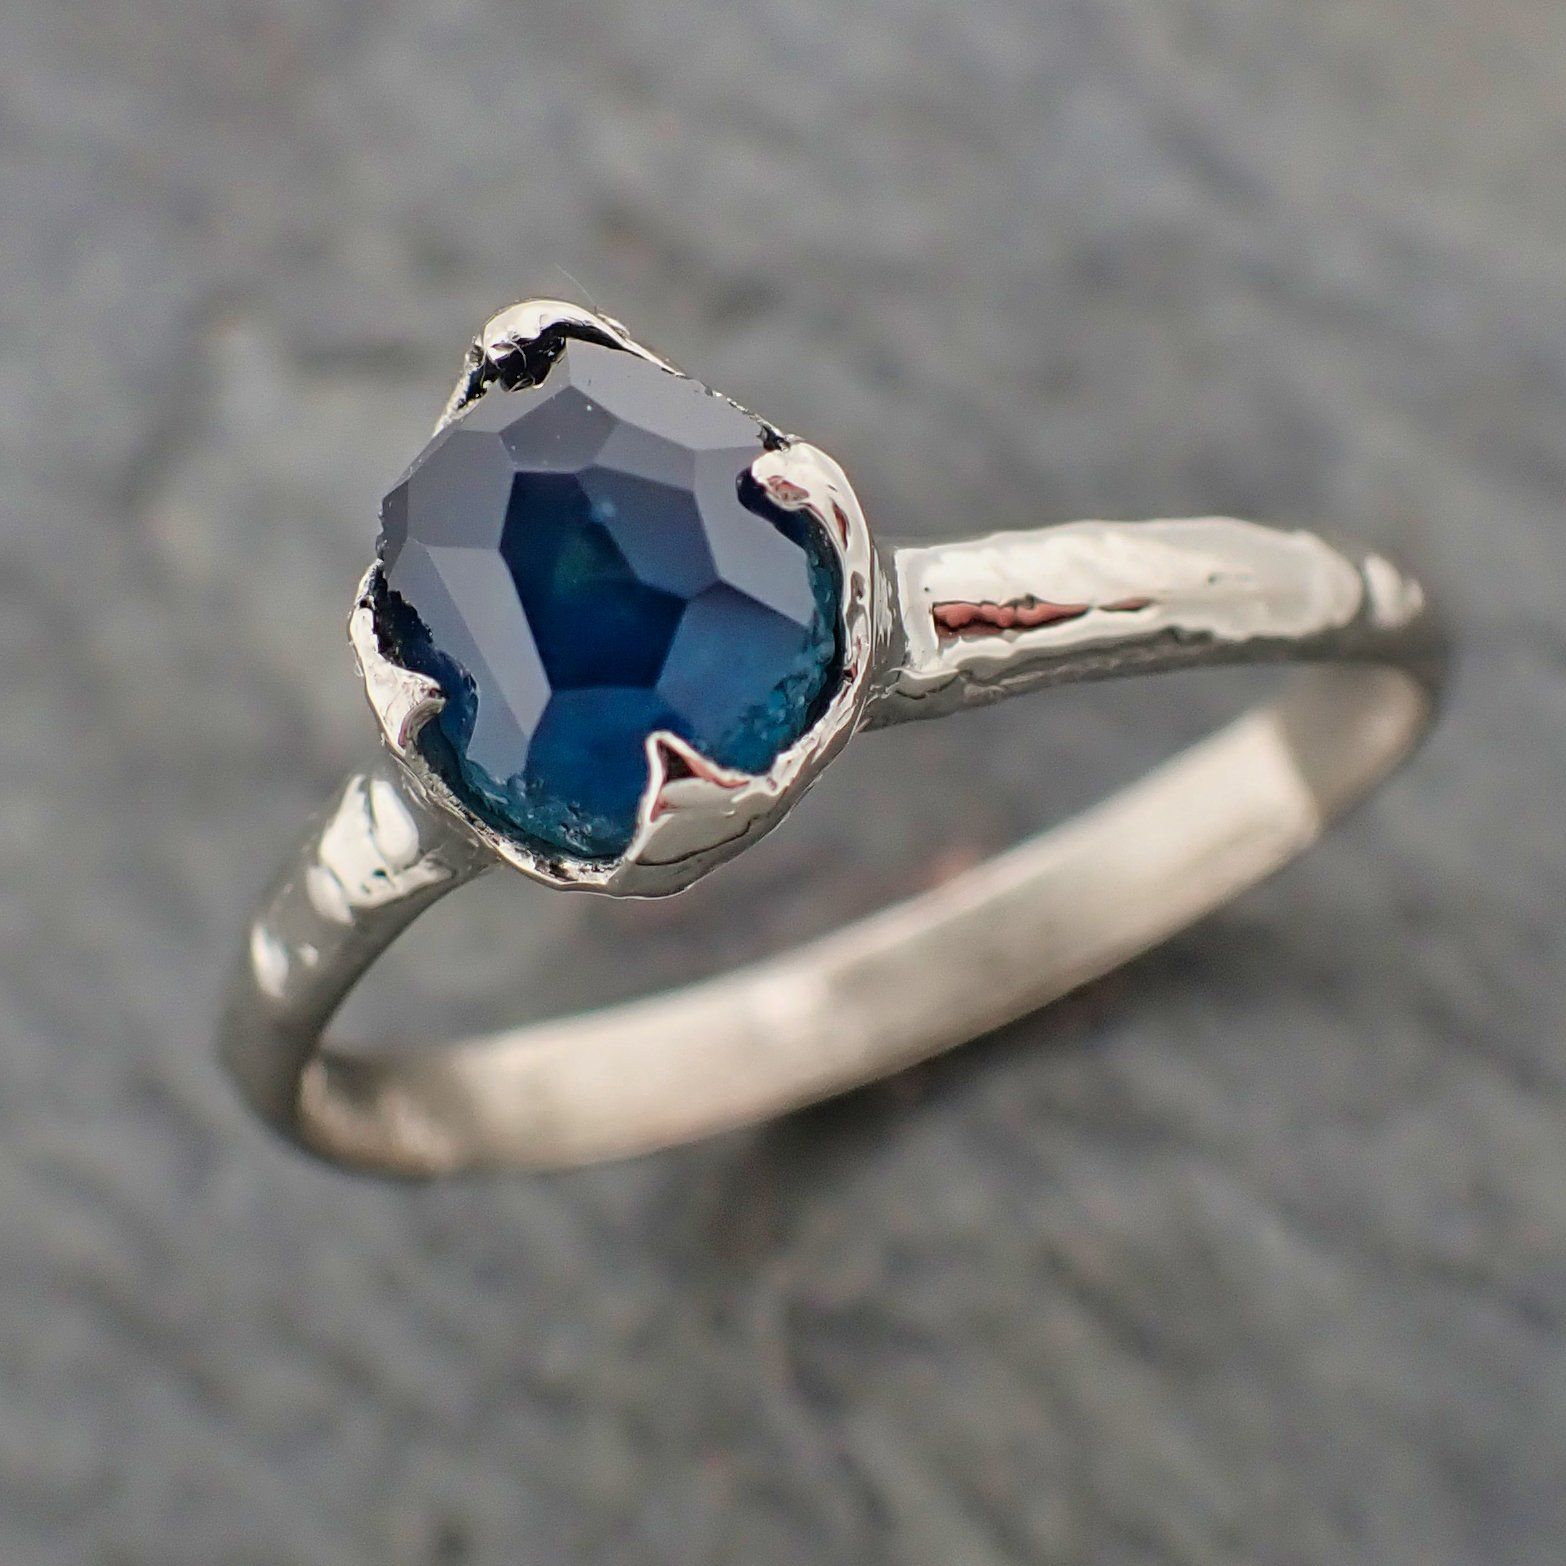 partially faceted blue montana sapphire solitaire 18k white gold engagement ring wedding ring one of a kind gemstone ring 2195 Alternative Engagement